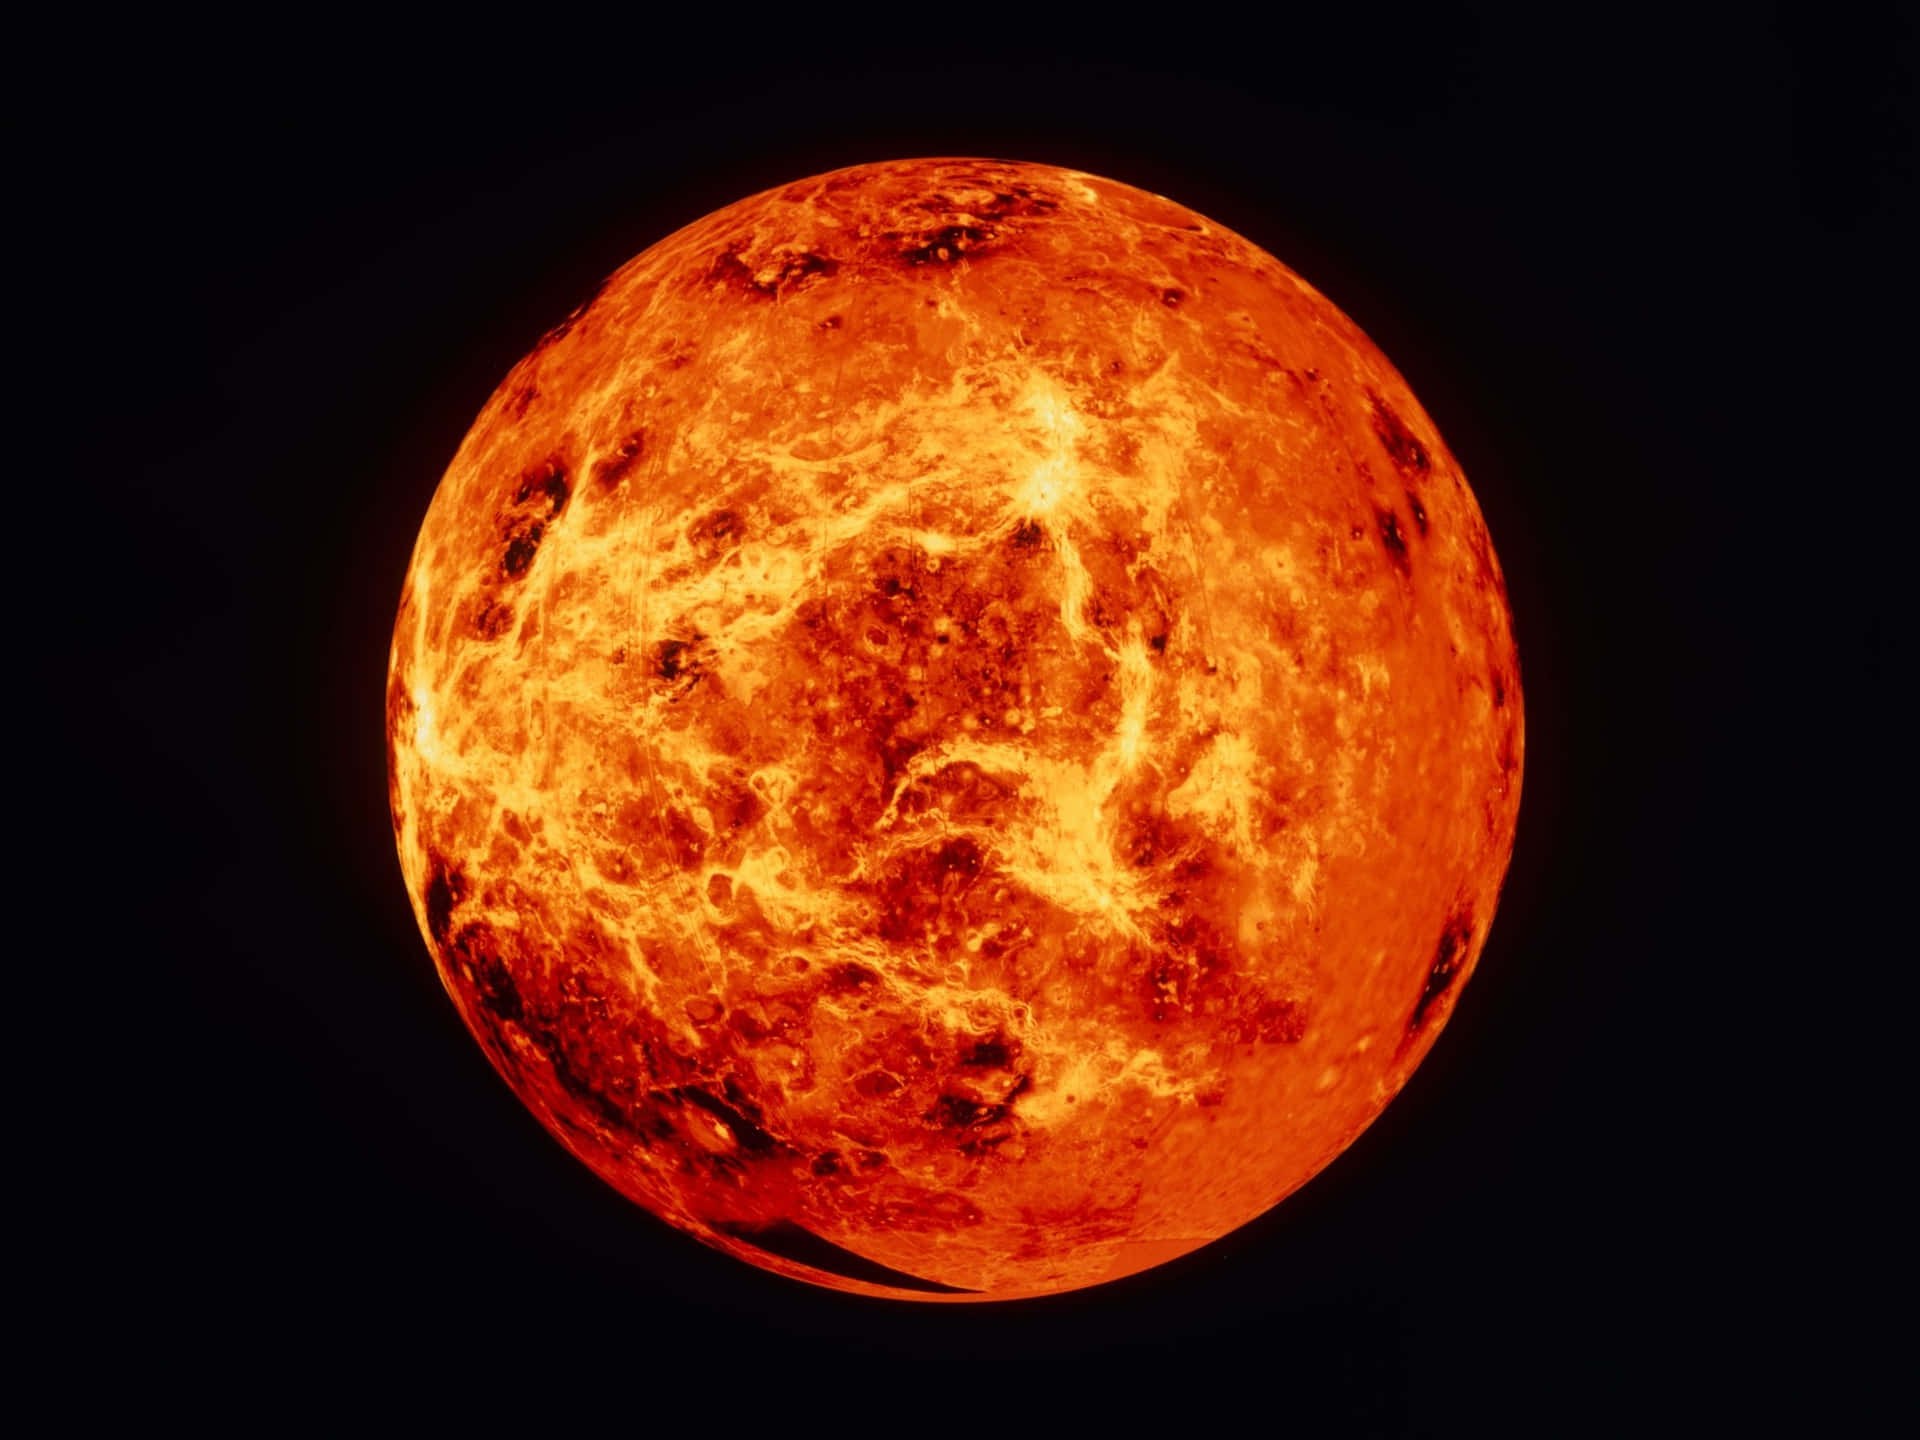 A Large Orange Sphere With A Black Background